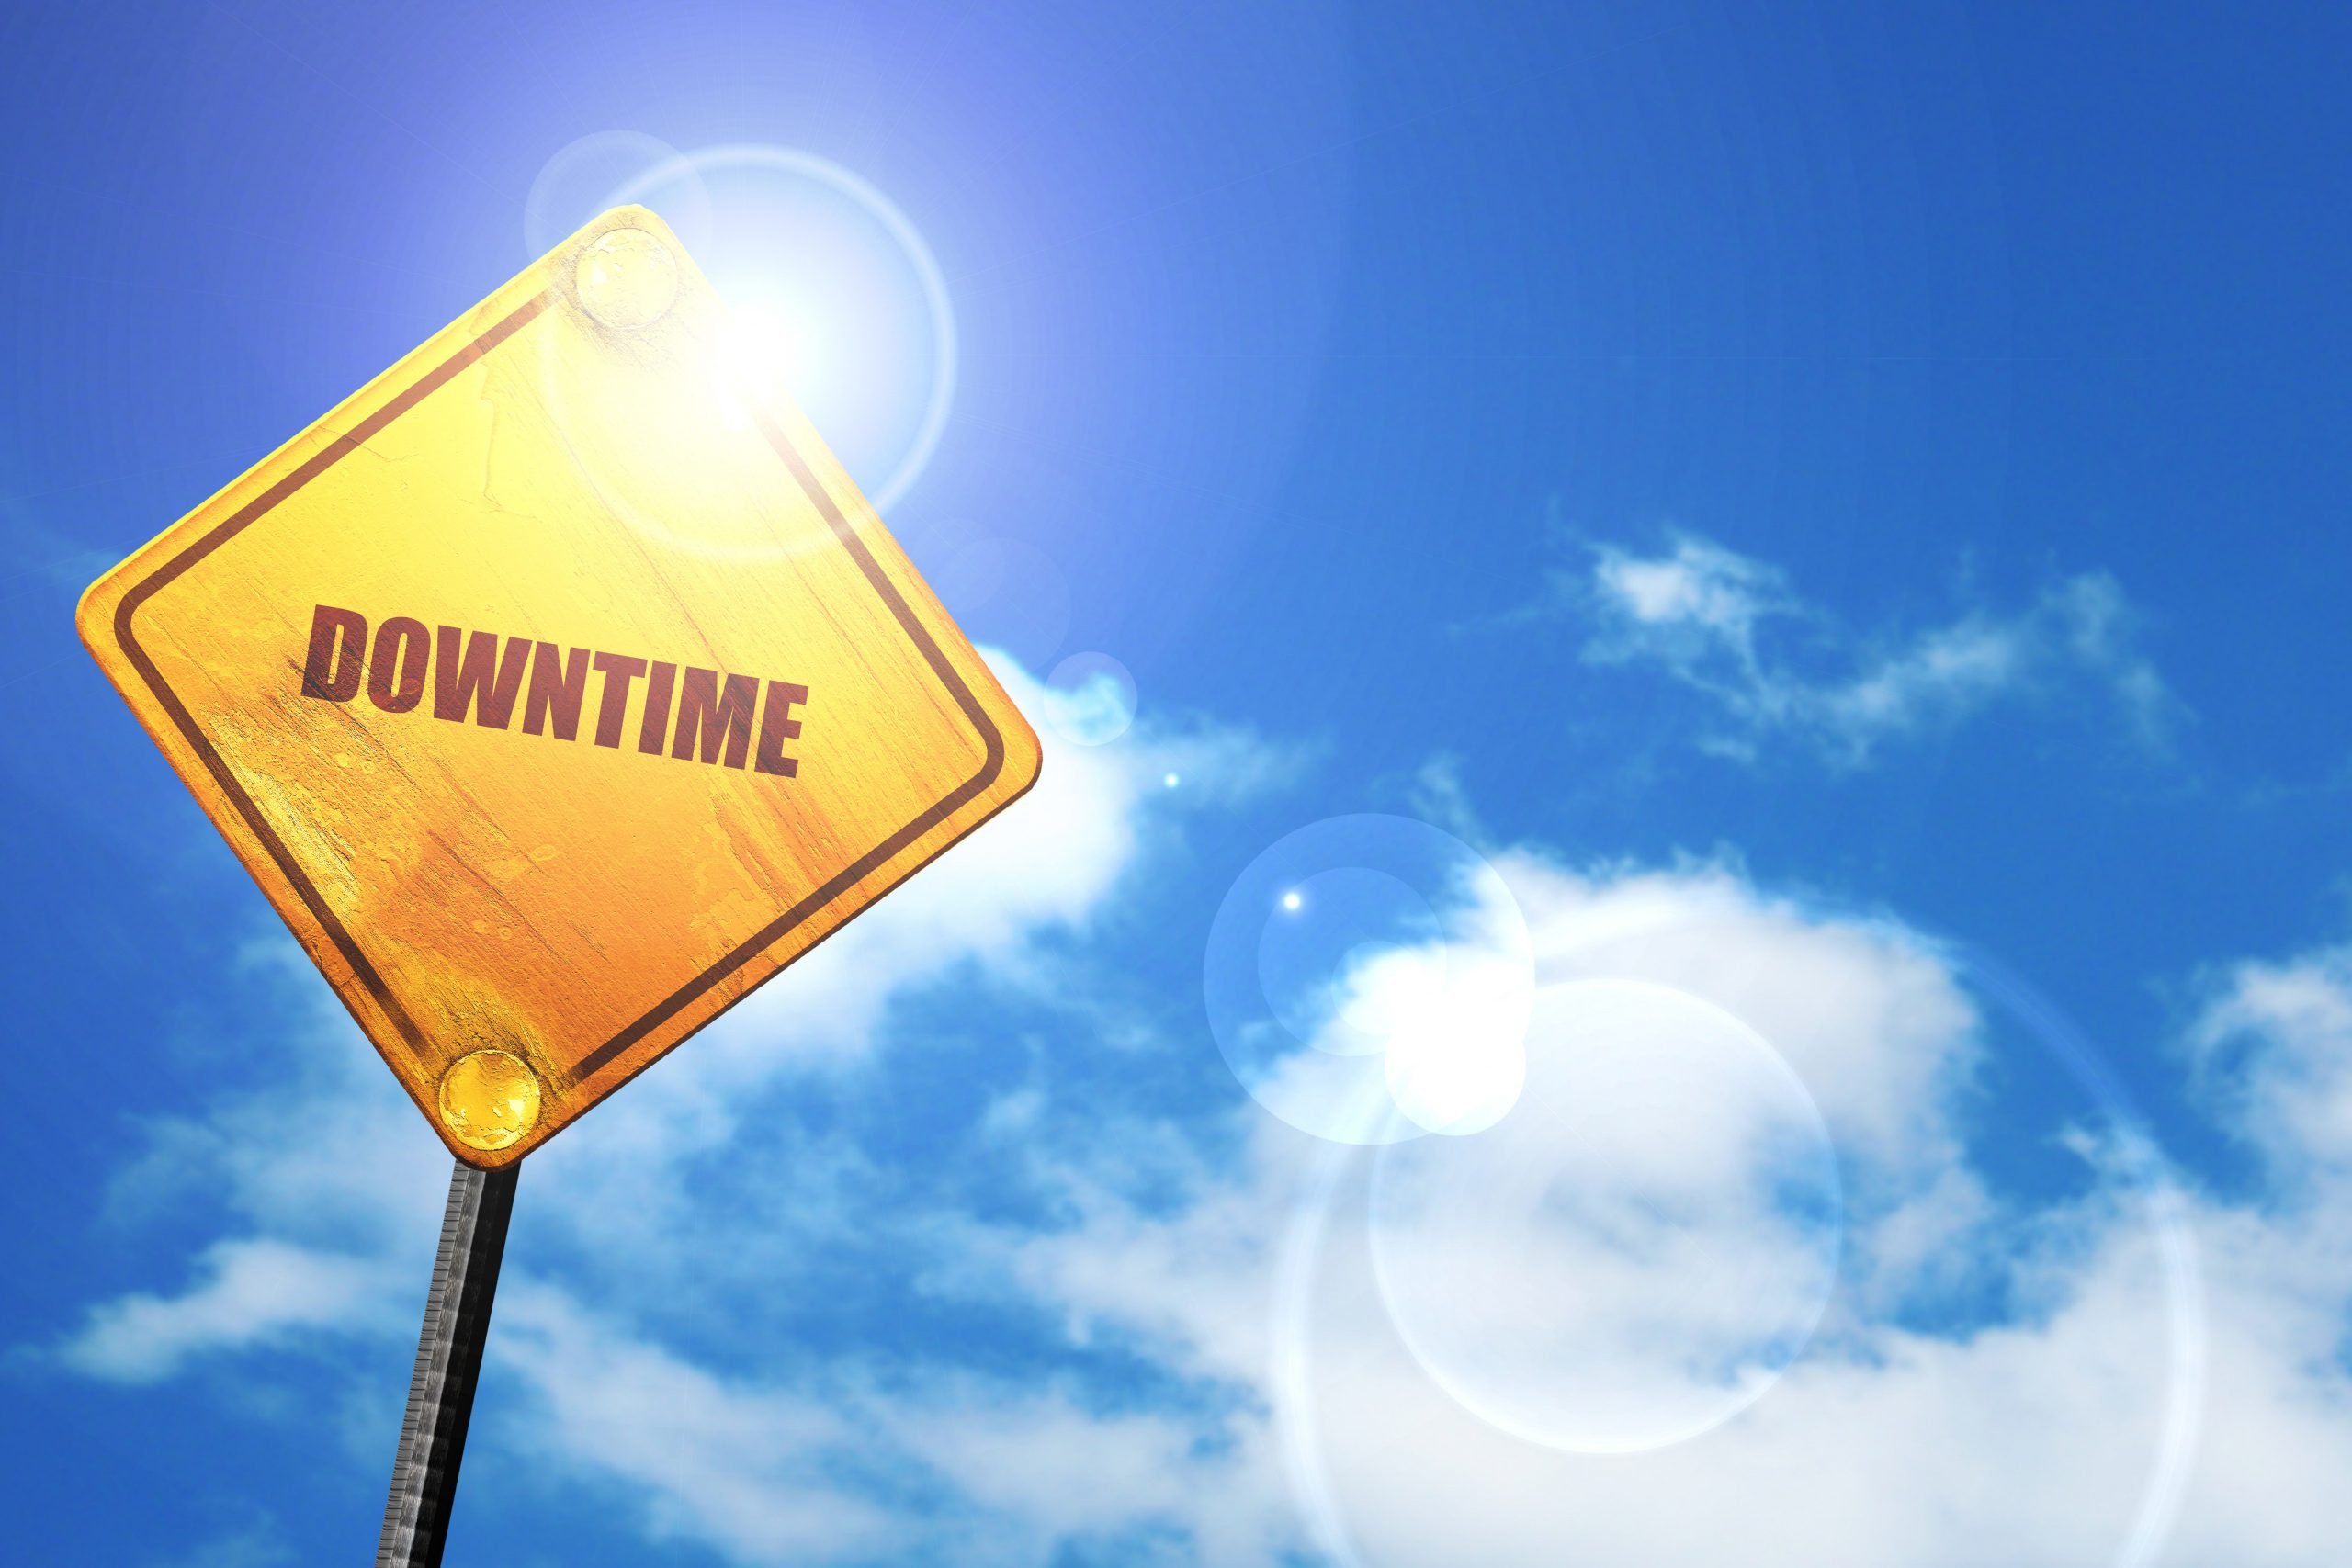 Can you afford to have downtime to your applications? Does the cloud provide the business continuity you need?